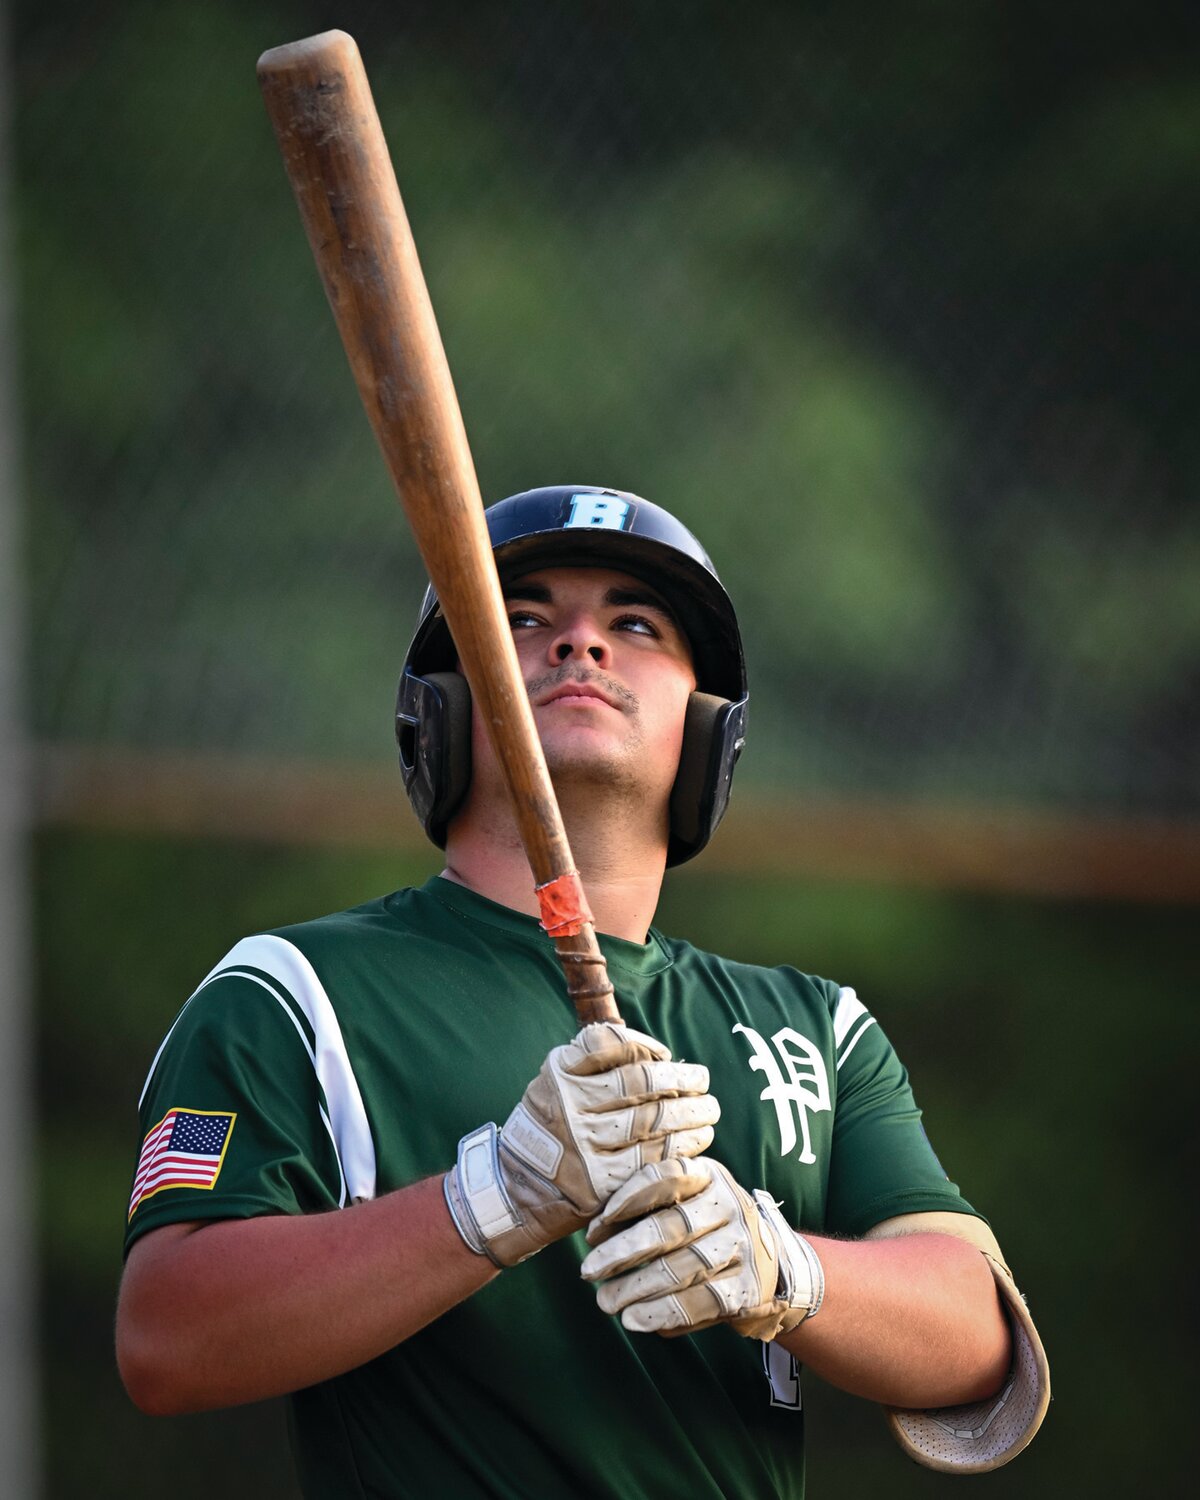 Pennridge’s Joey Ruggiero warms up before his at-bat in the fourth inning.